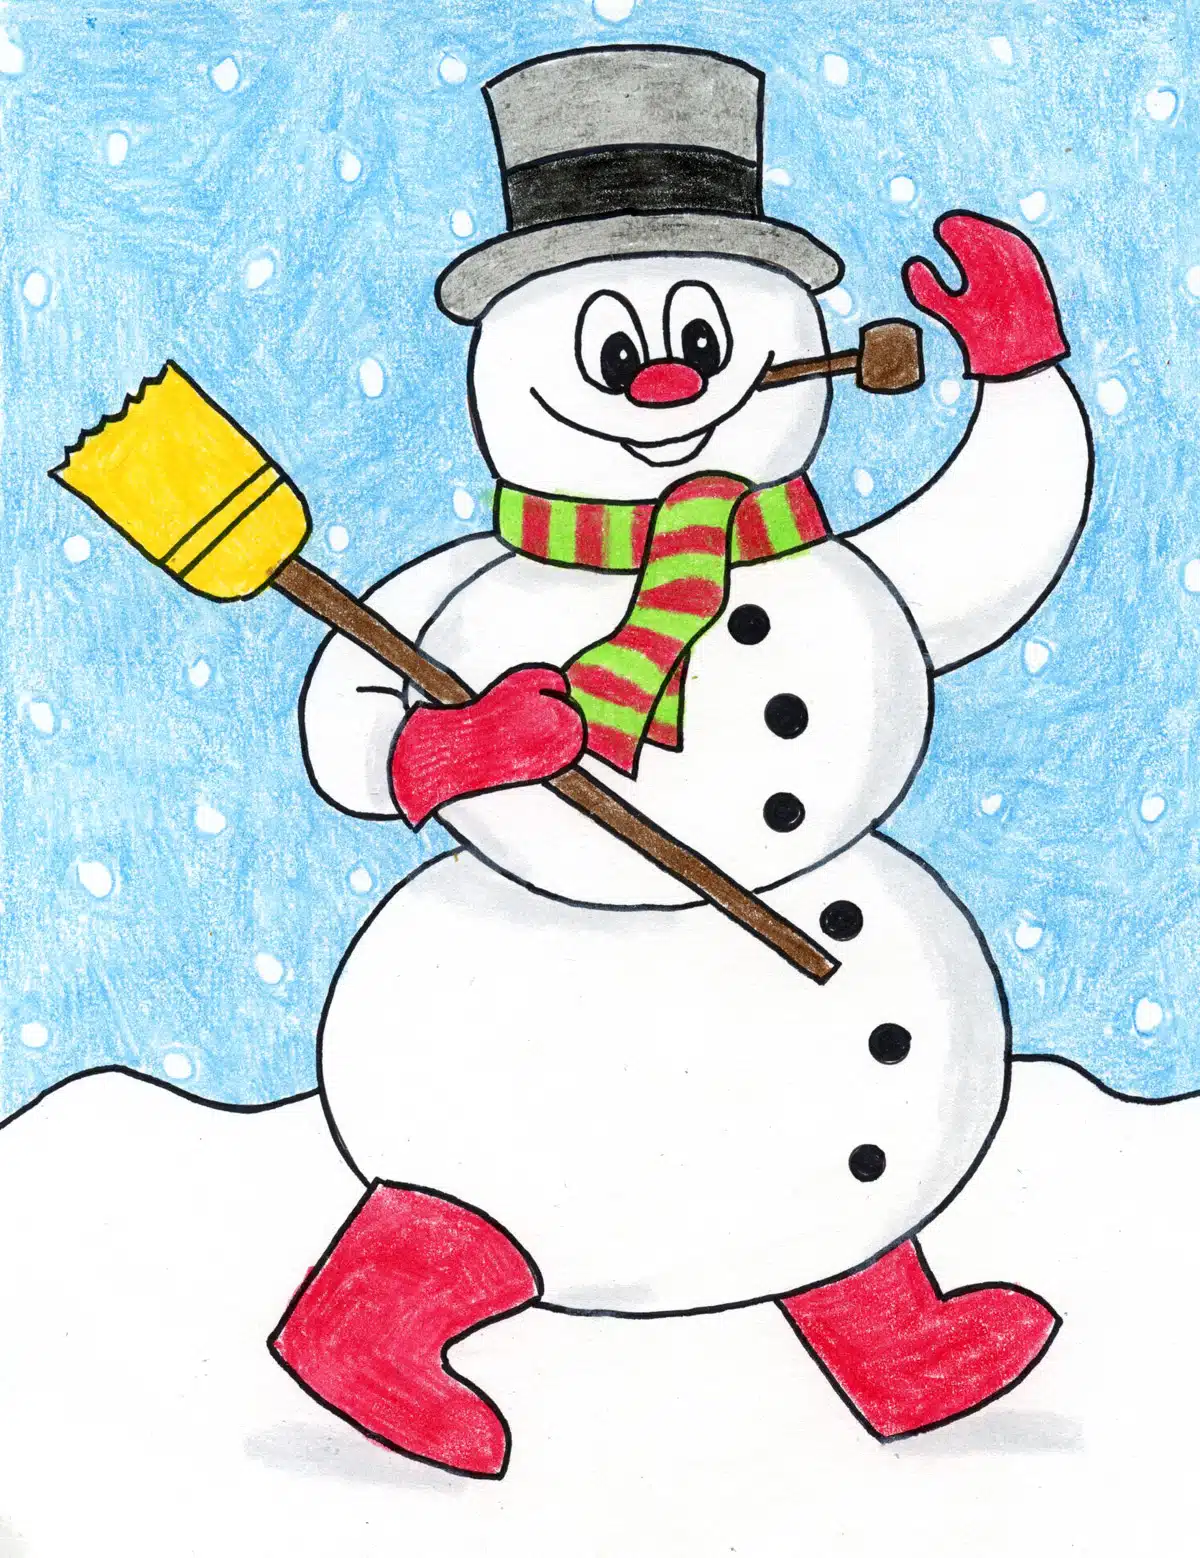 Easy How to Draw Frosty the Snowman Tutorial and Frosty Coloring Page